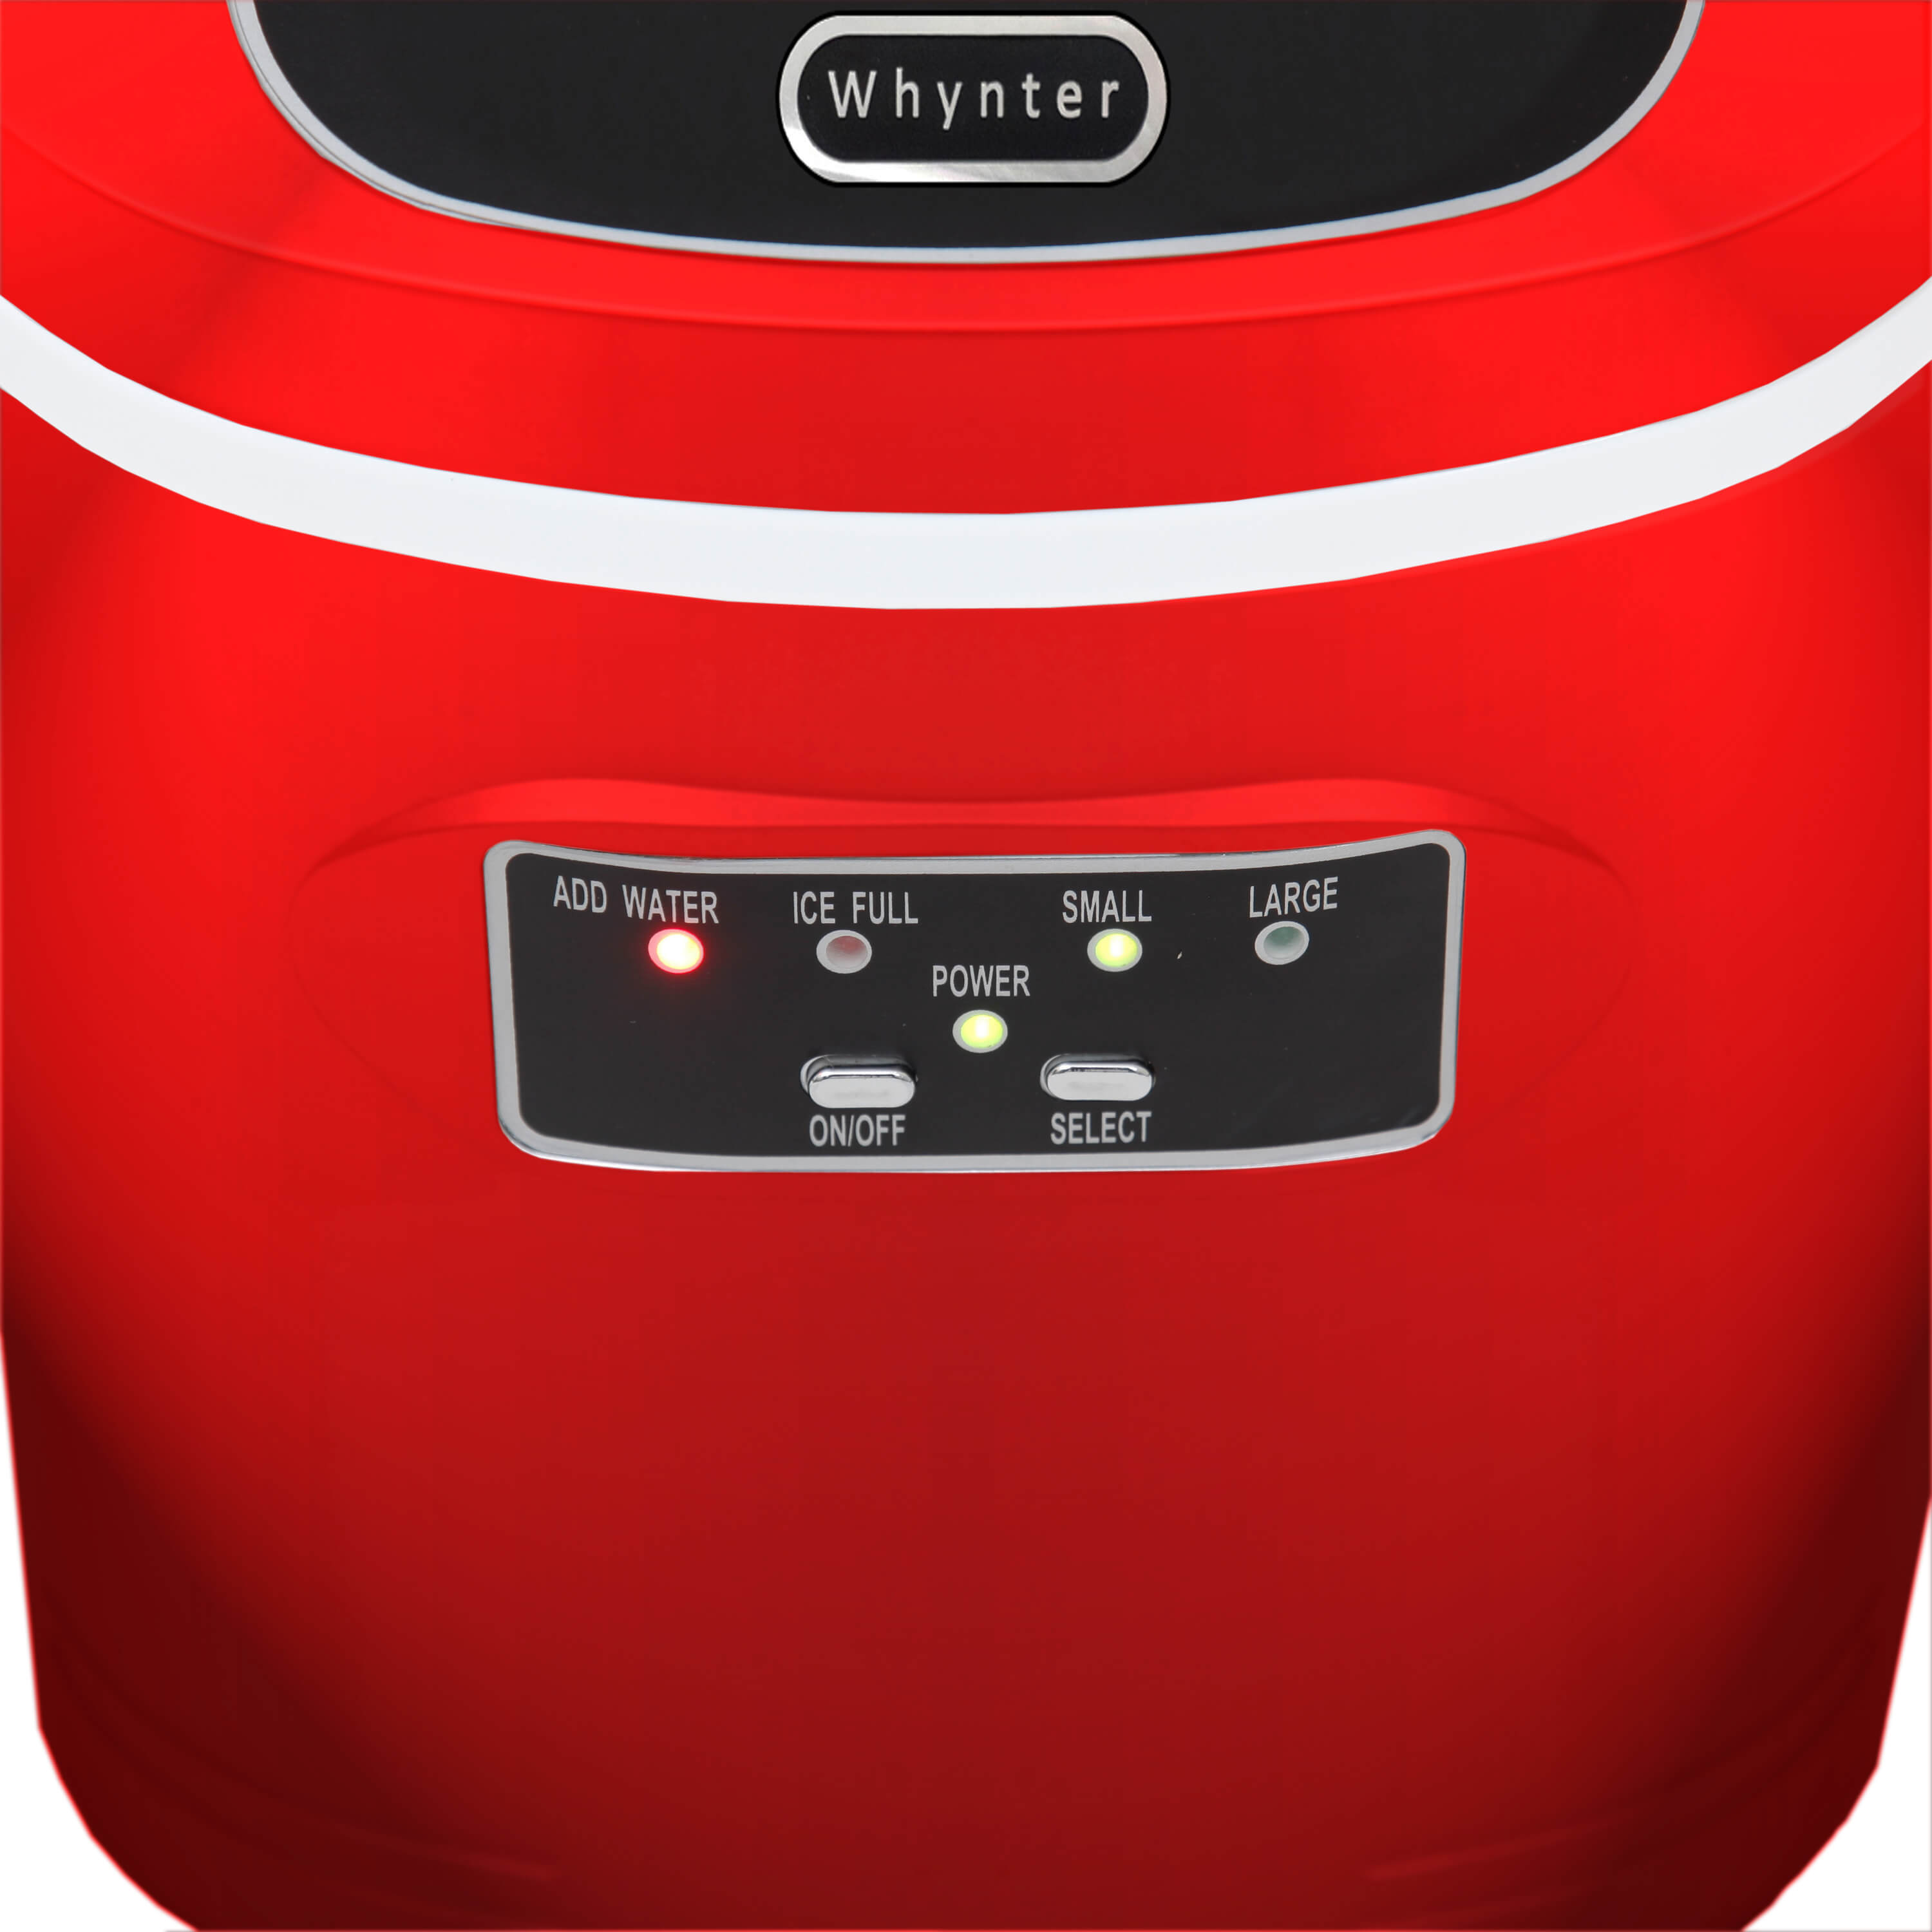 Whynter - Compact Portable Ice Maker 27 lb capacity - Red | IMC-270MR